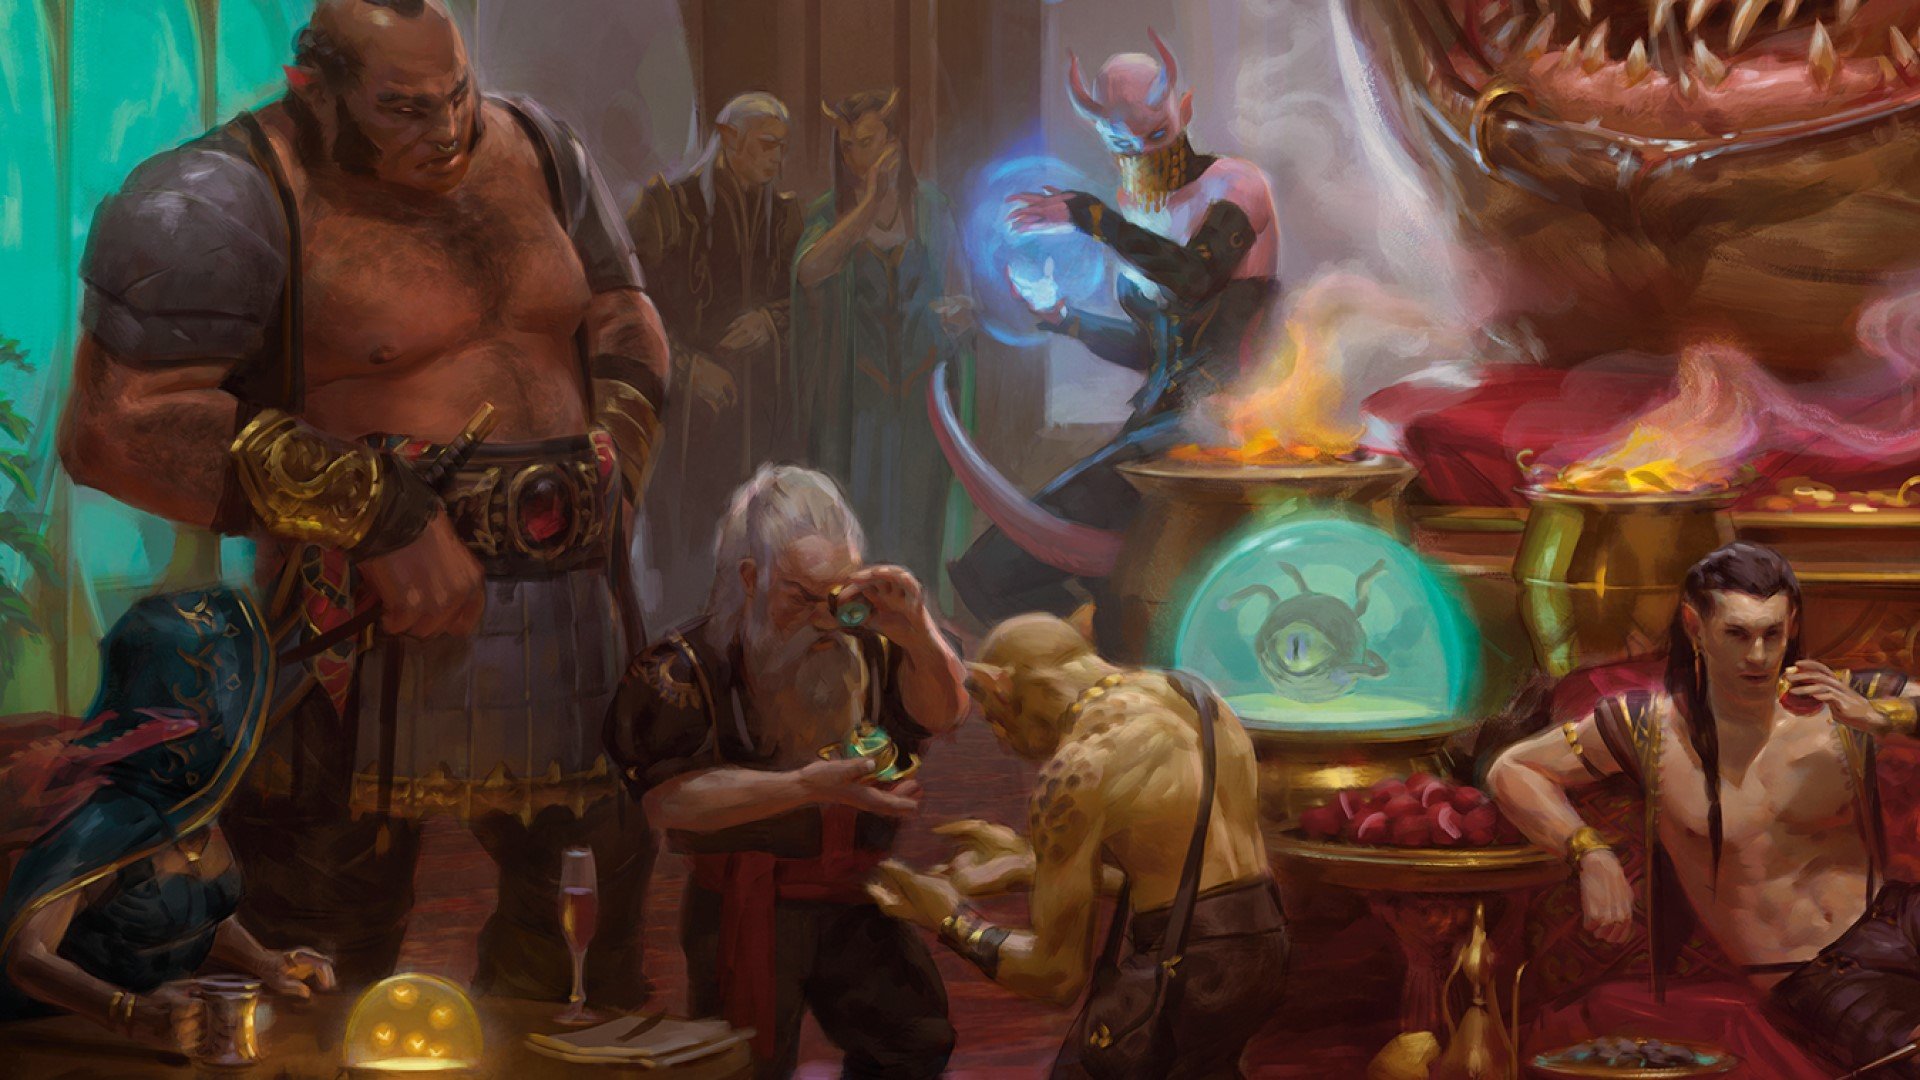 DnD Backgrounds 5E - Wizards of the Coast art of members of Xanathar's Guild